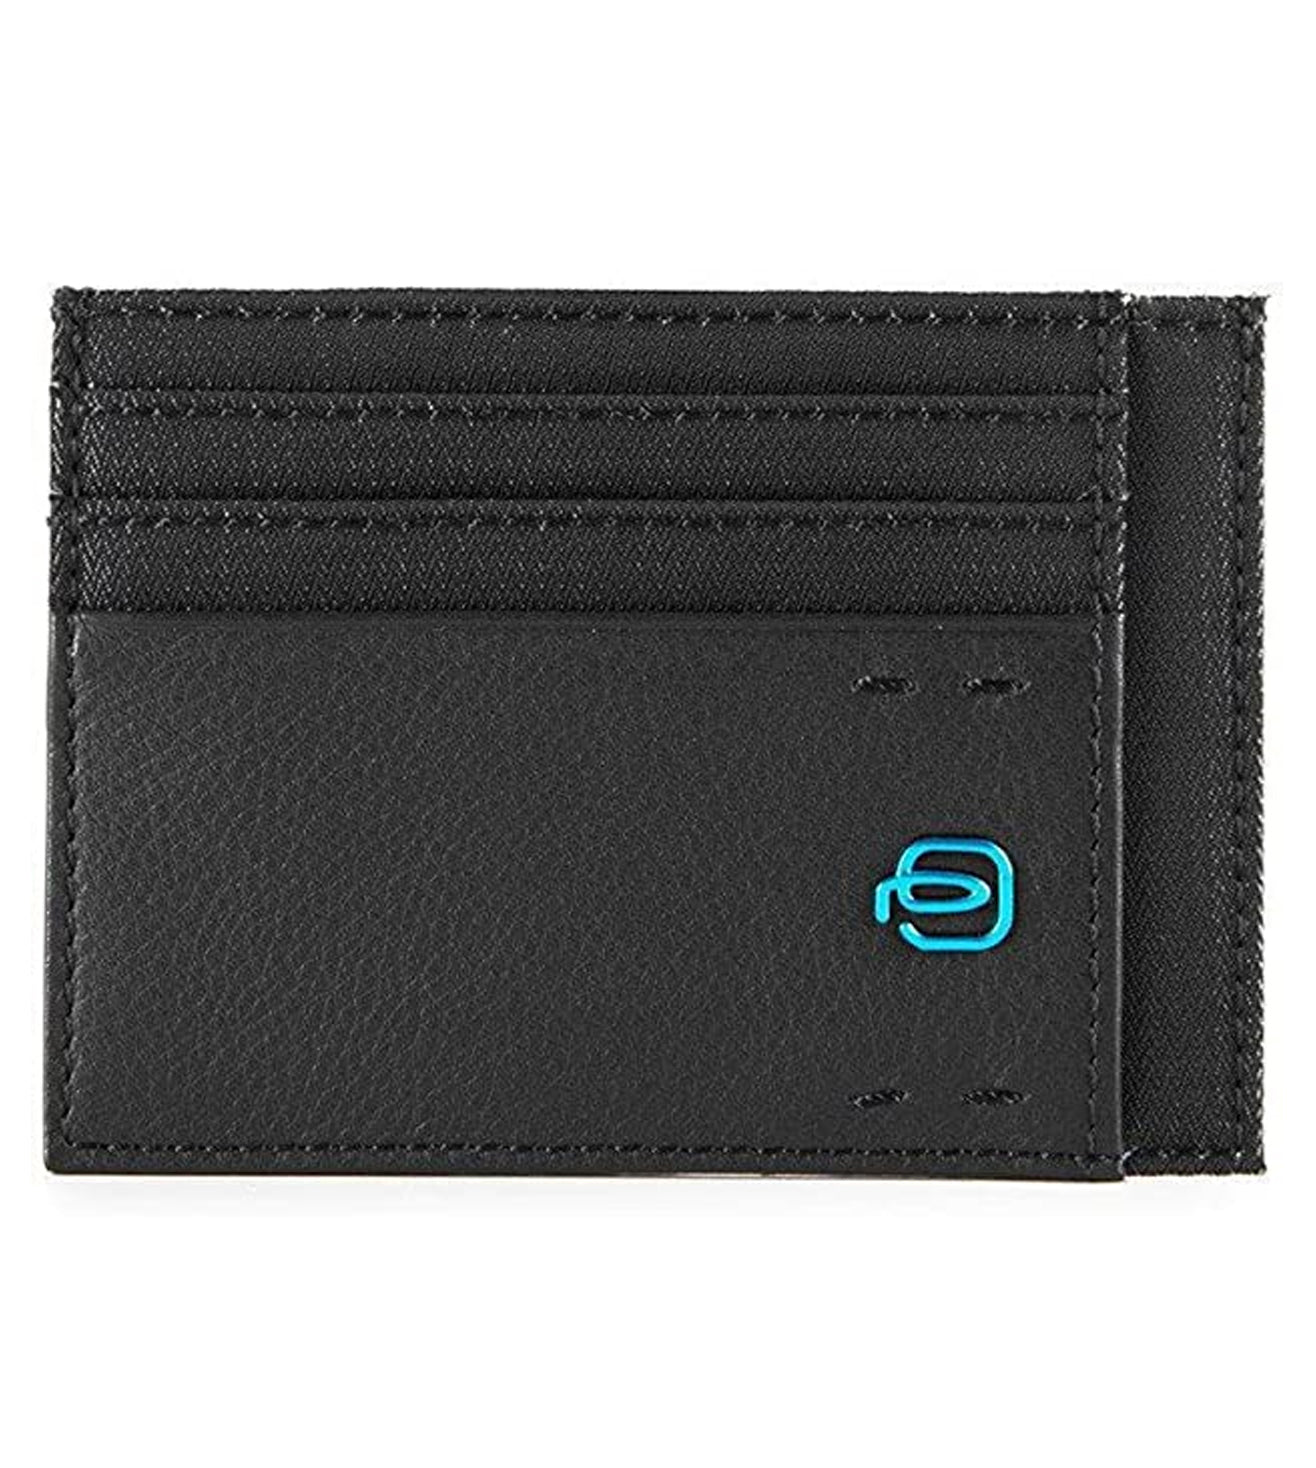 Piquadro Pulse Leather Credit Card Holder